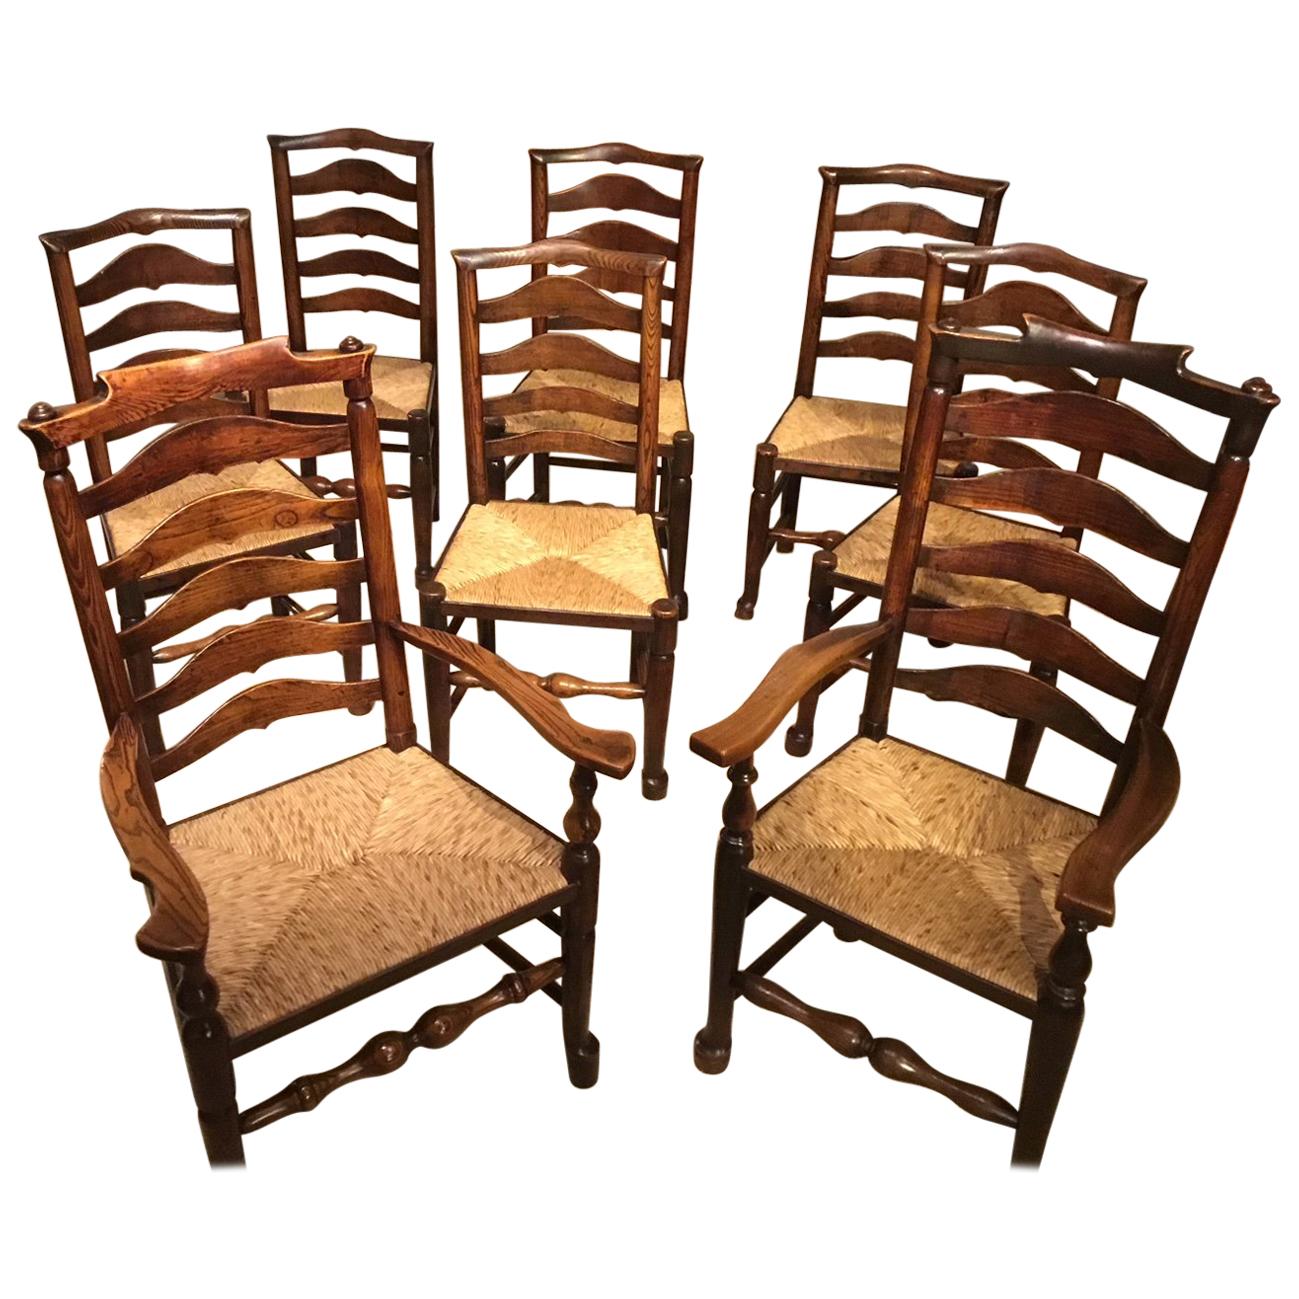 Harlequin Set of 8 Early 19th Century Ash and Elm Ladder Back Dining Chairs